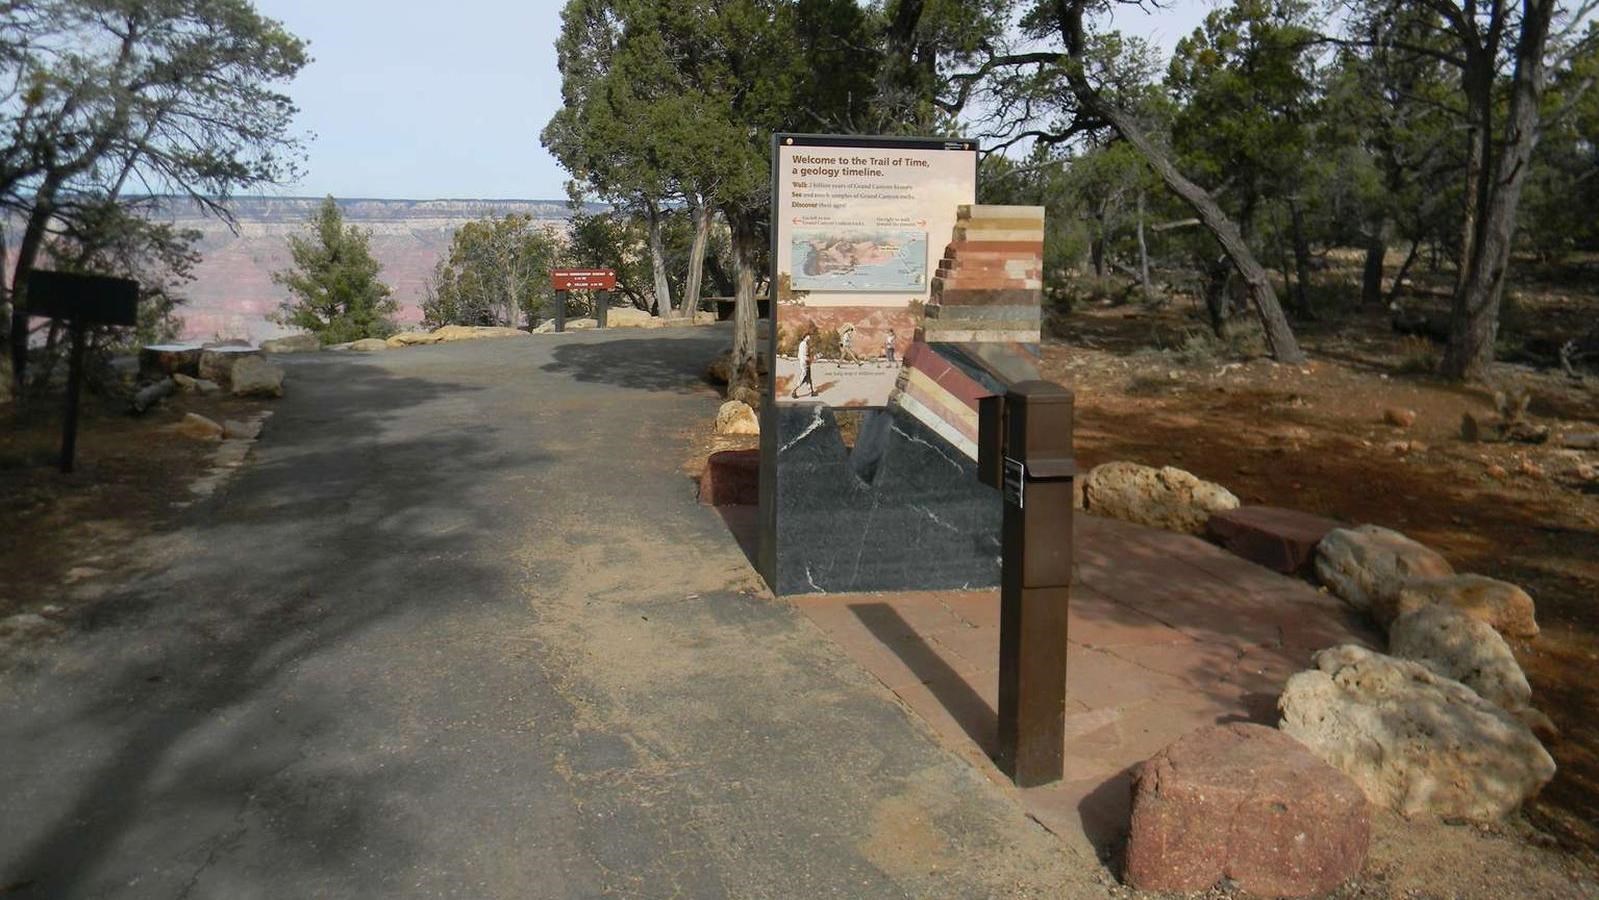 paved footpath with a stone portal sign showing canyon rock layers. Canyon landscape in the distance